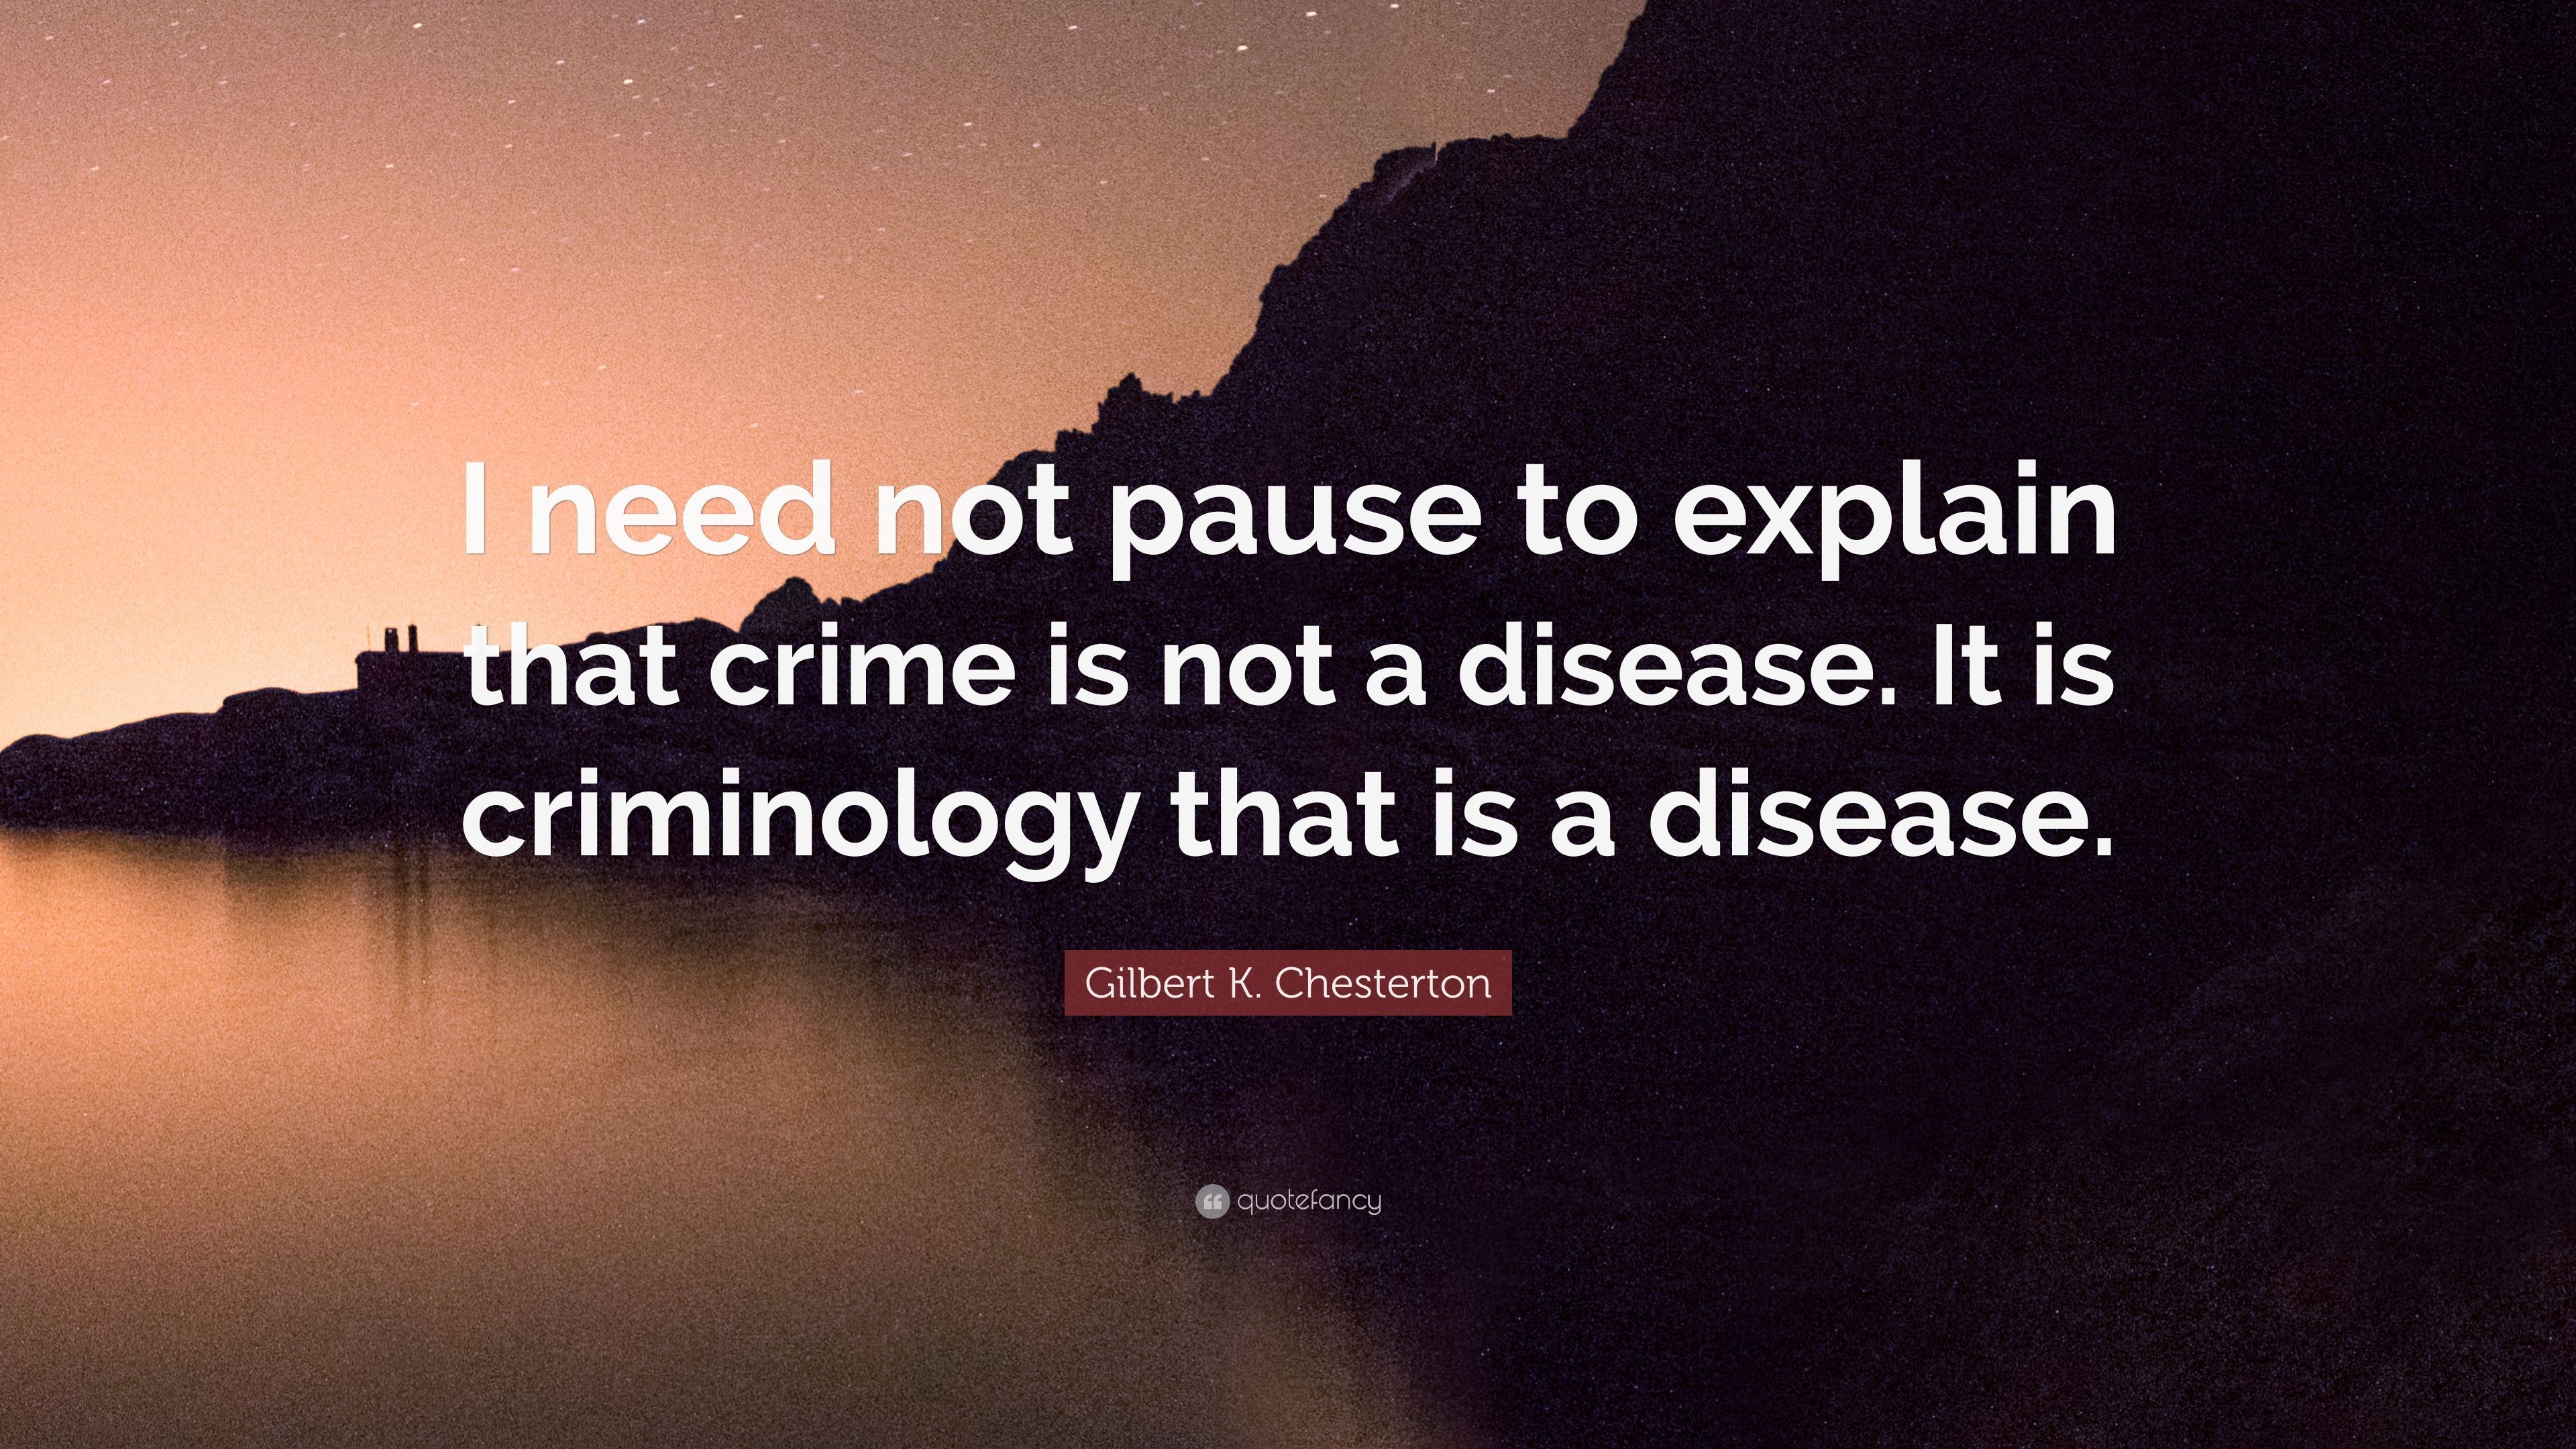 Gilbert K. Chesterton Quote: “I need not pause to explain that crime